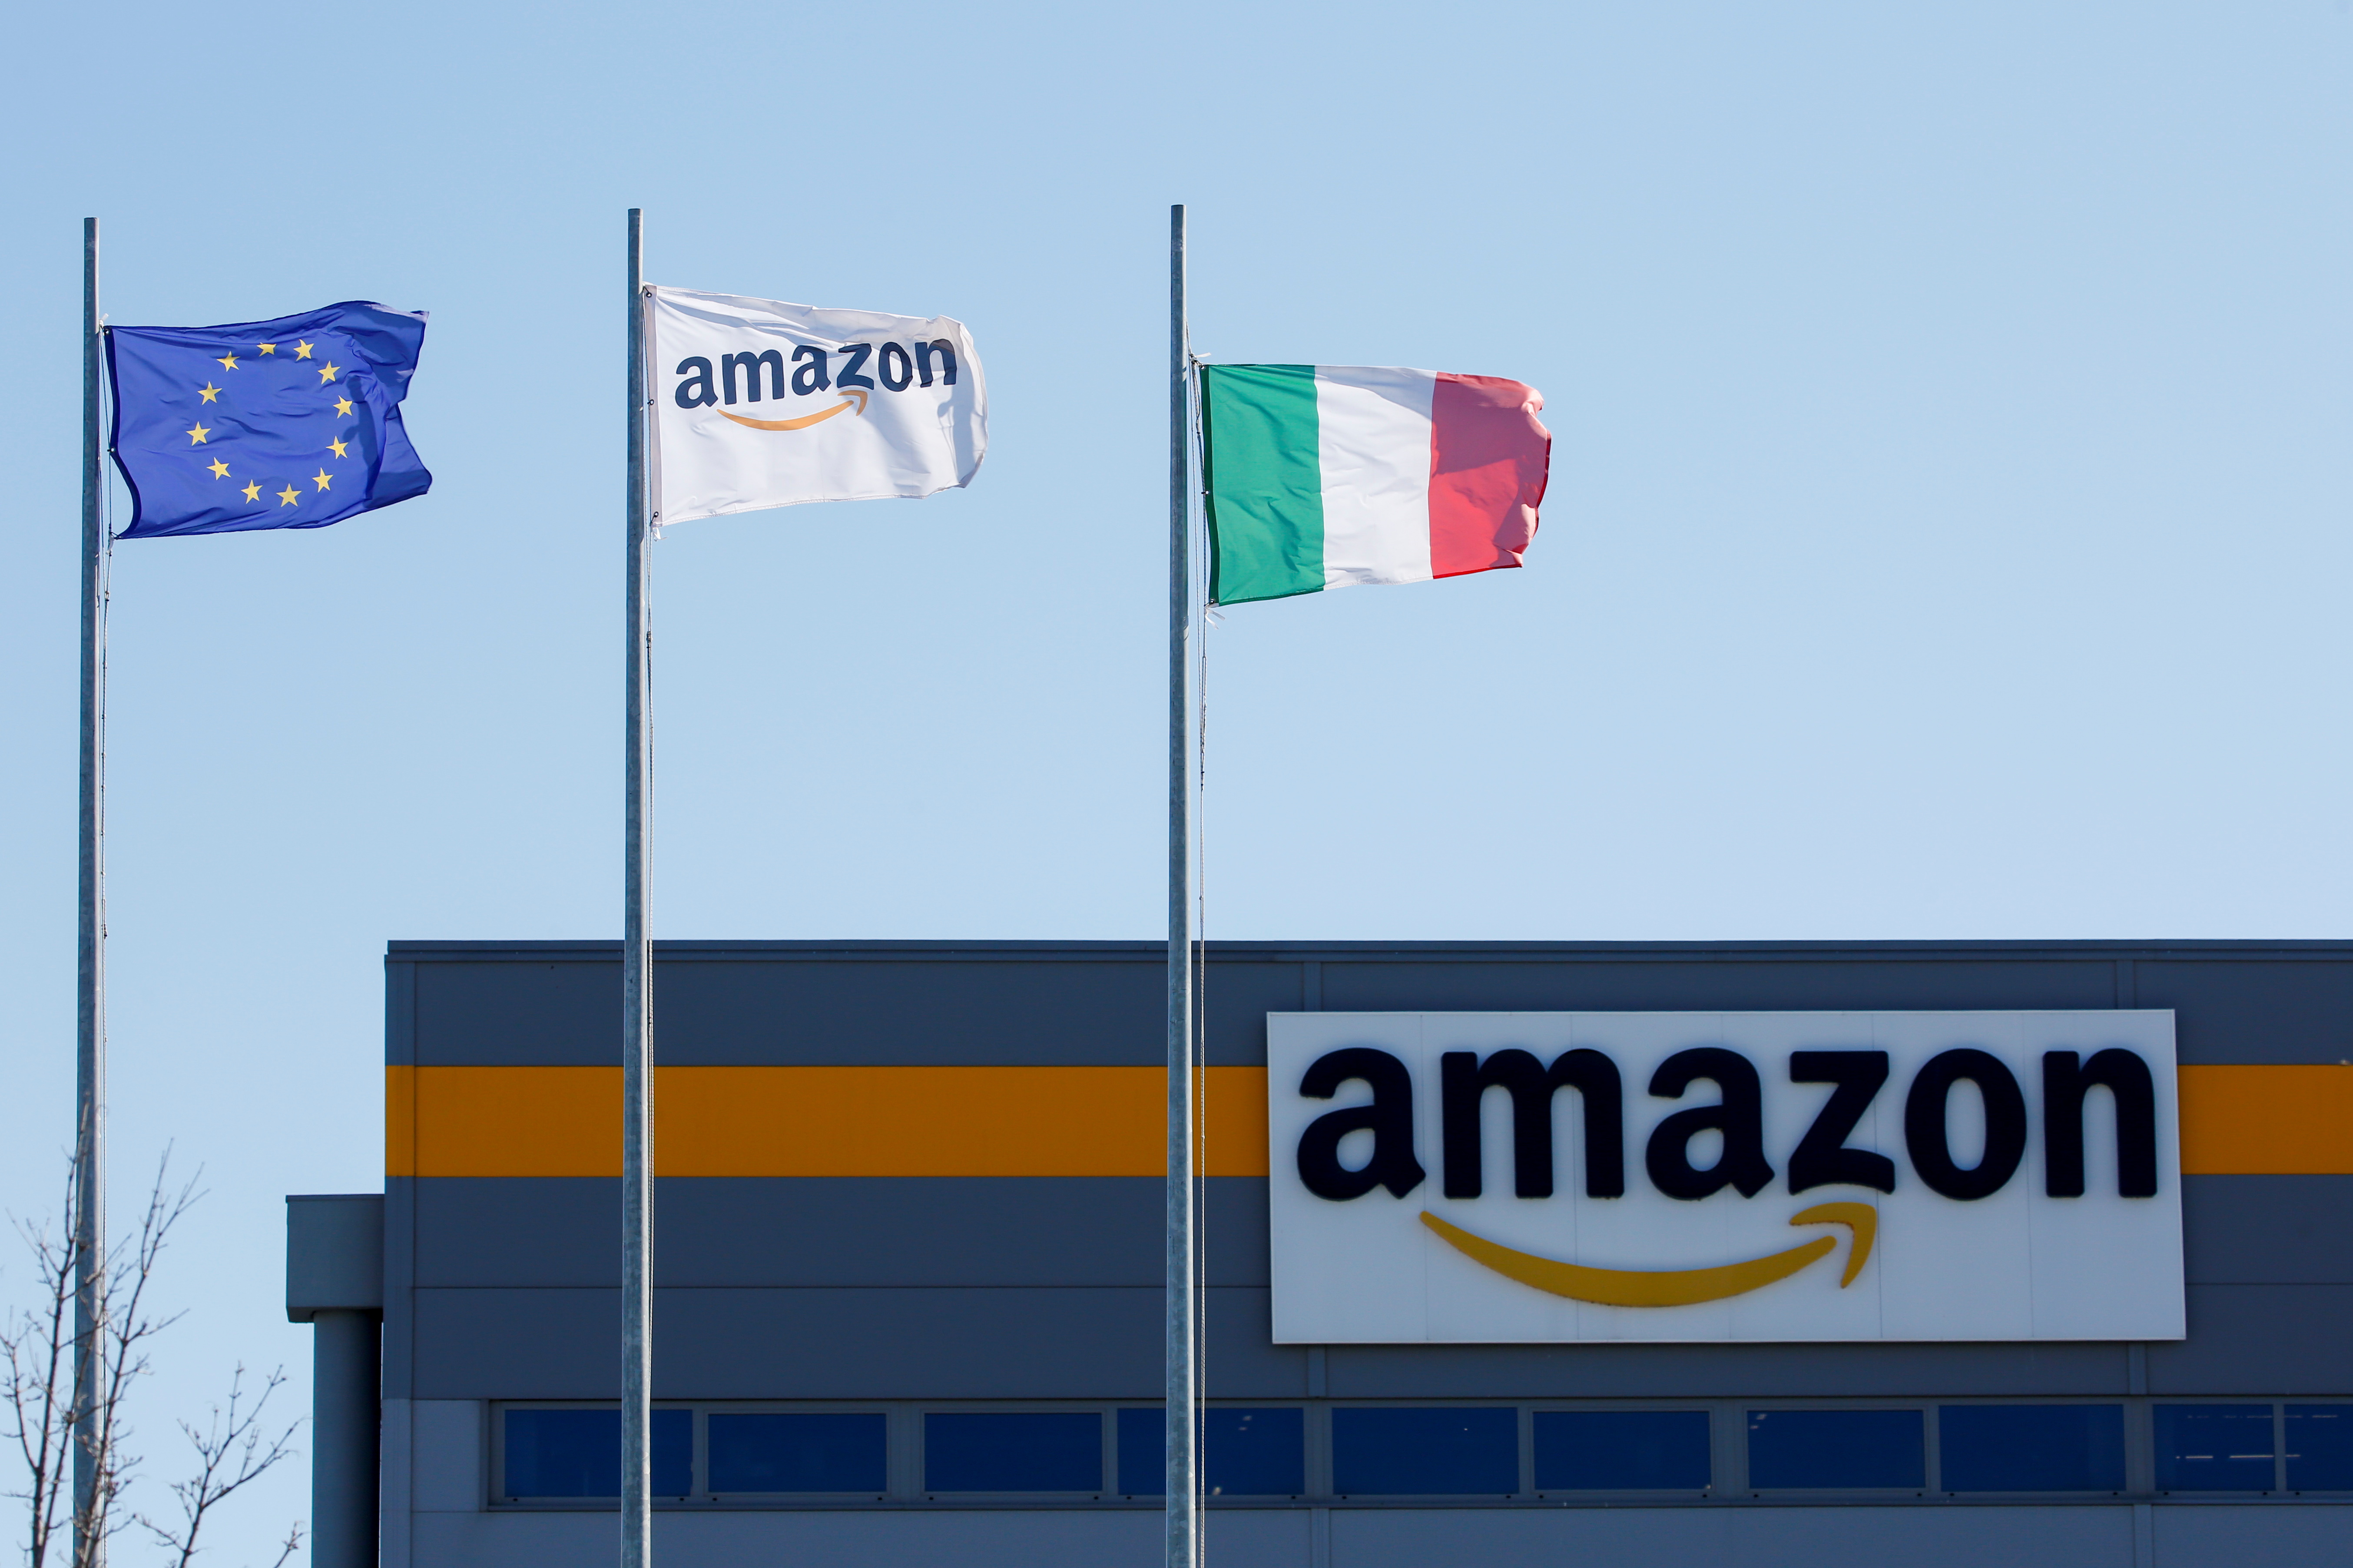 Workers of Amazon go on strike in Passo Corese